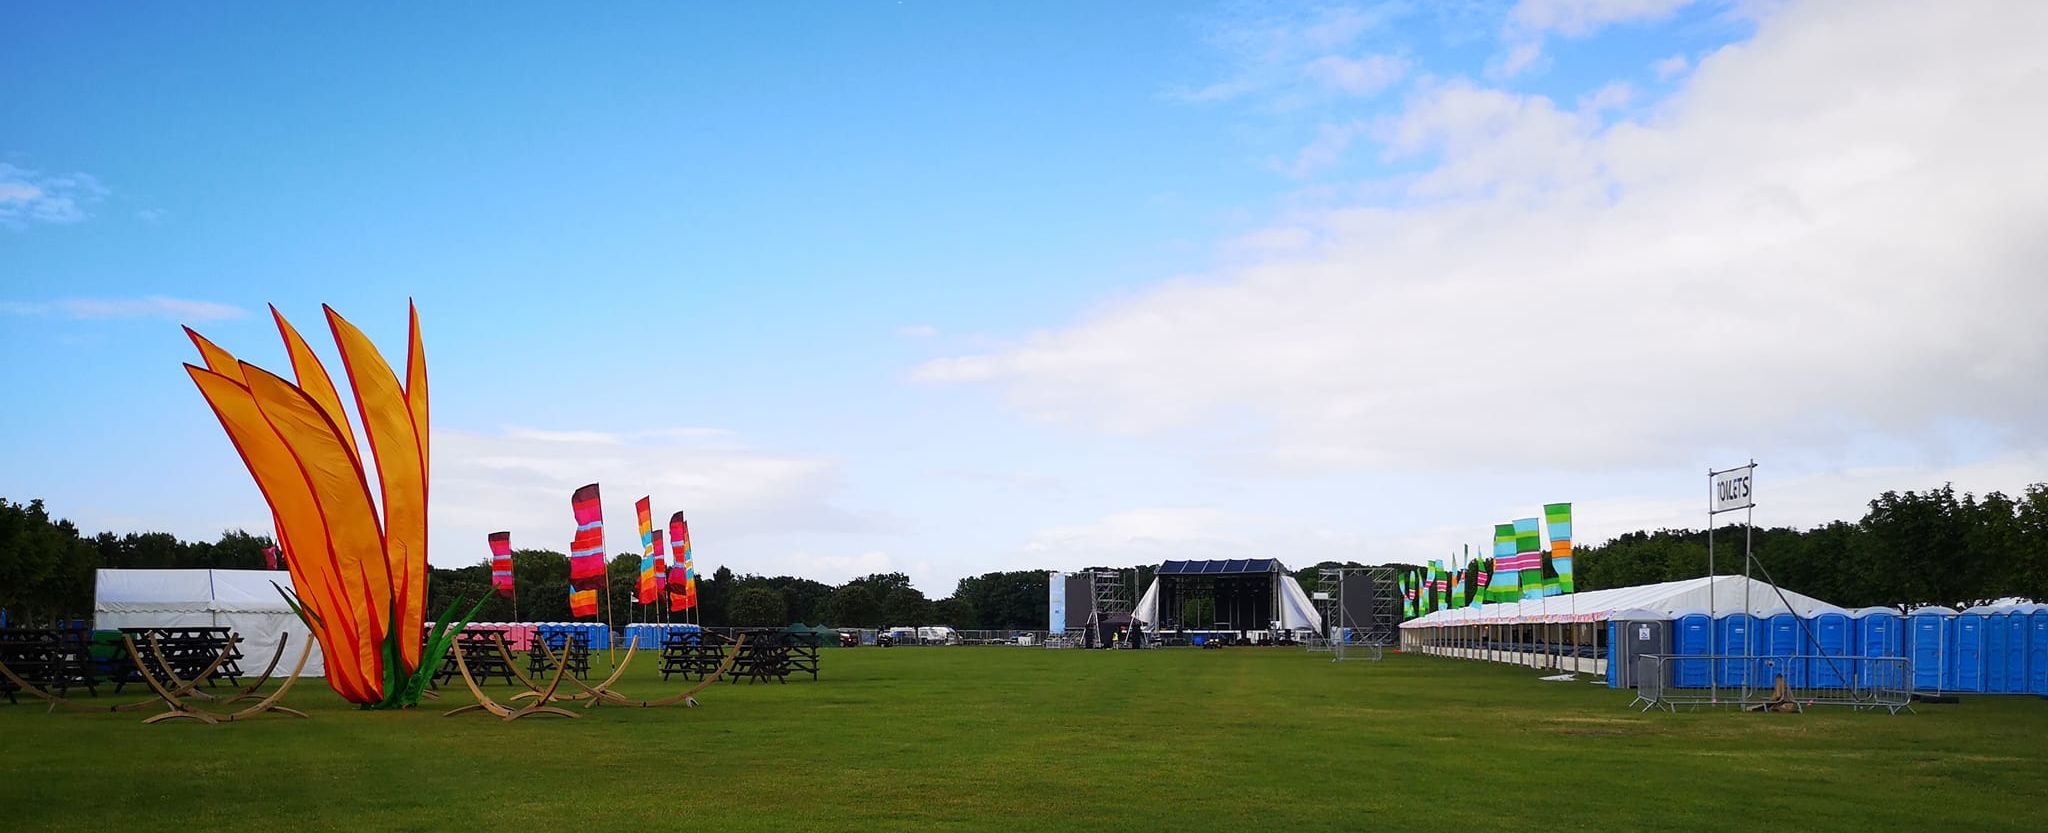 Victoria Park in Southport is all set for the Seaside Weekender. Photo by Alan Adams